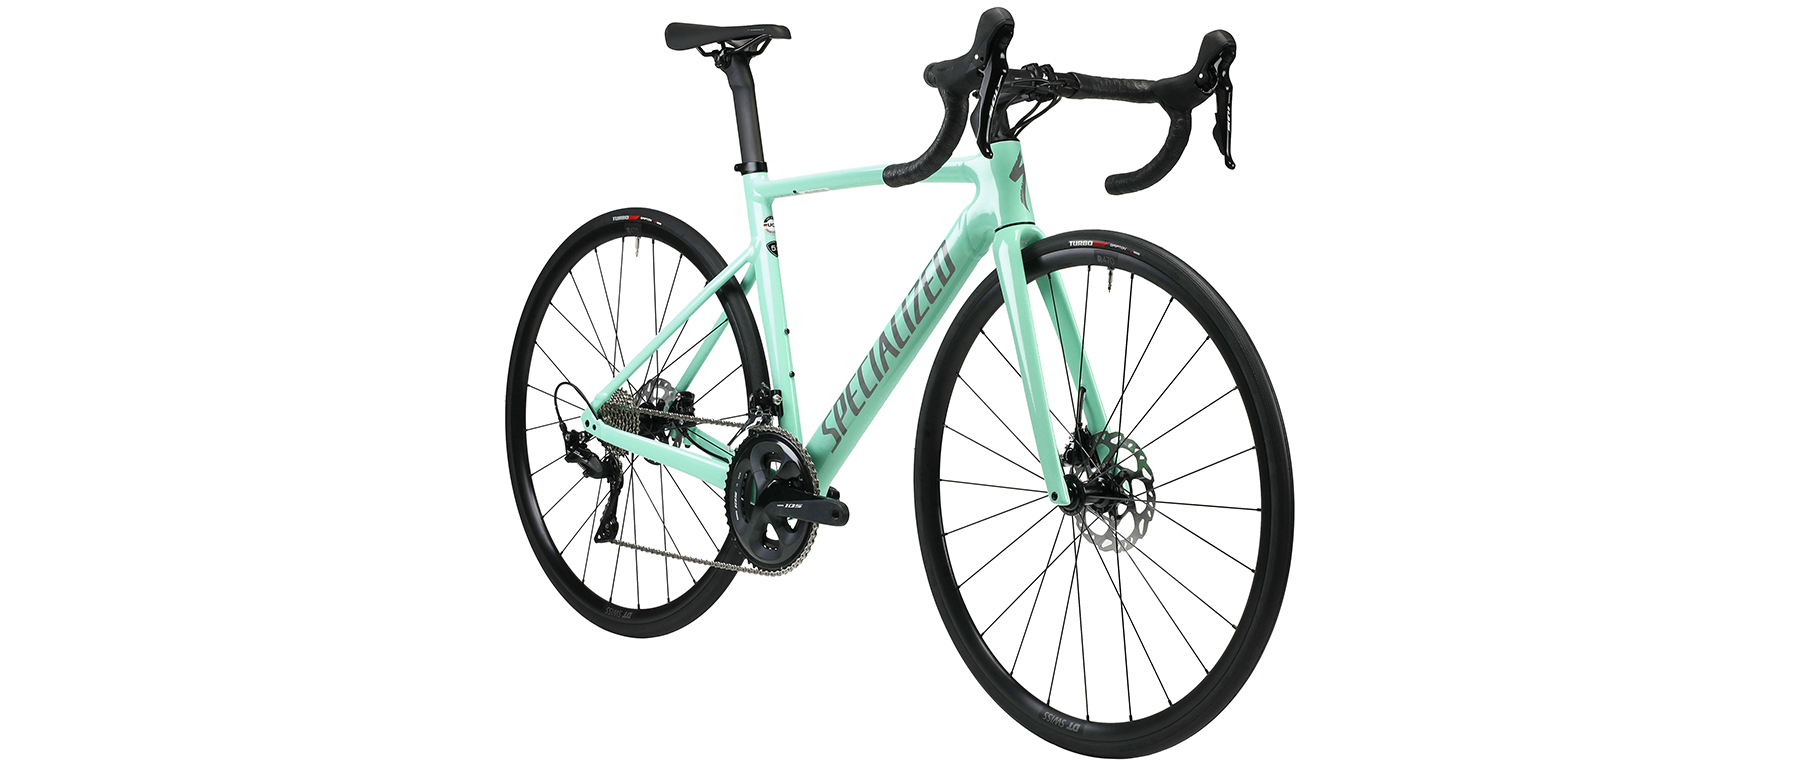 Specialized Allez Sprint Disc Comp Bicycle 2022